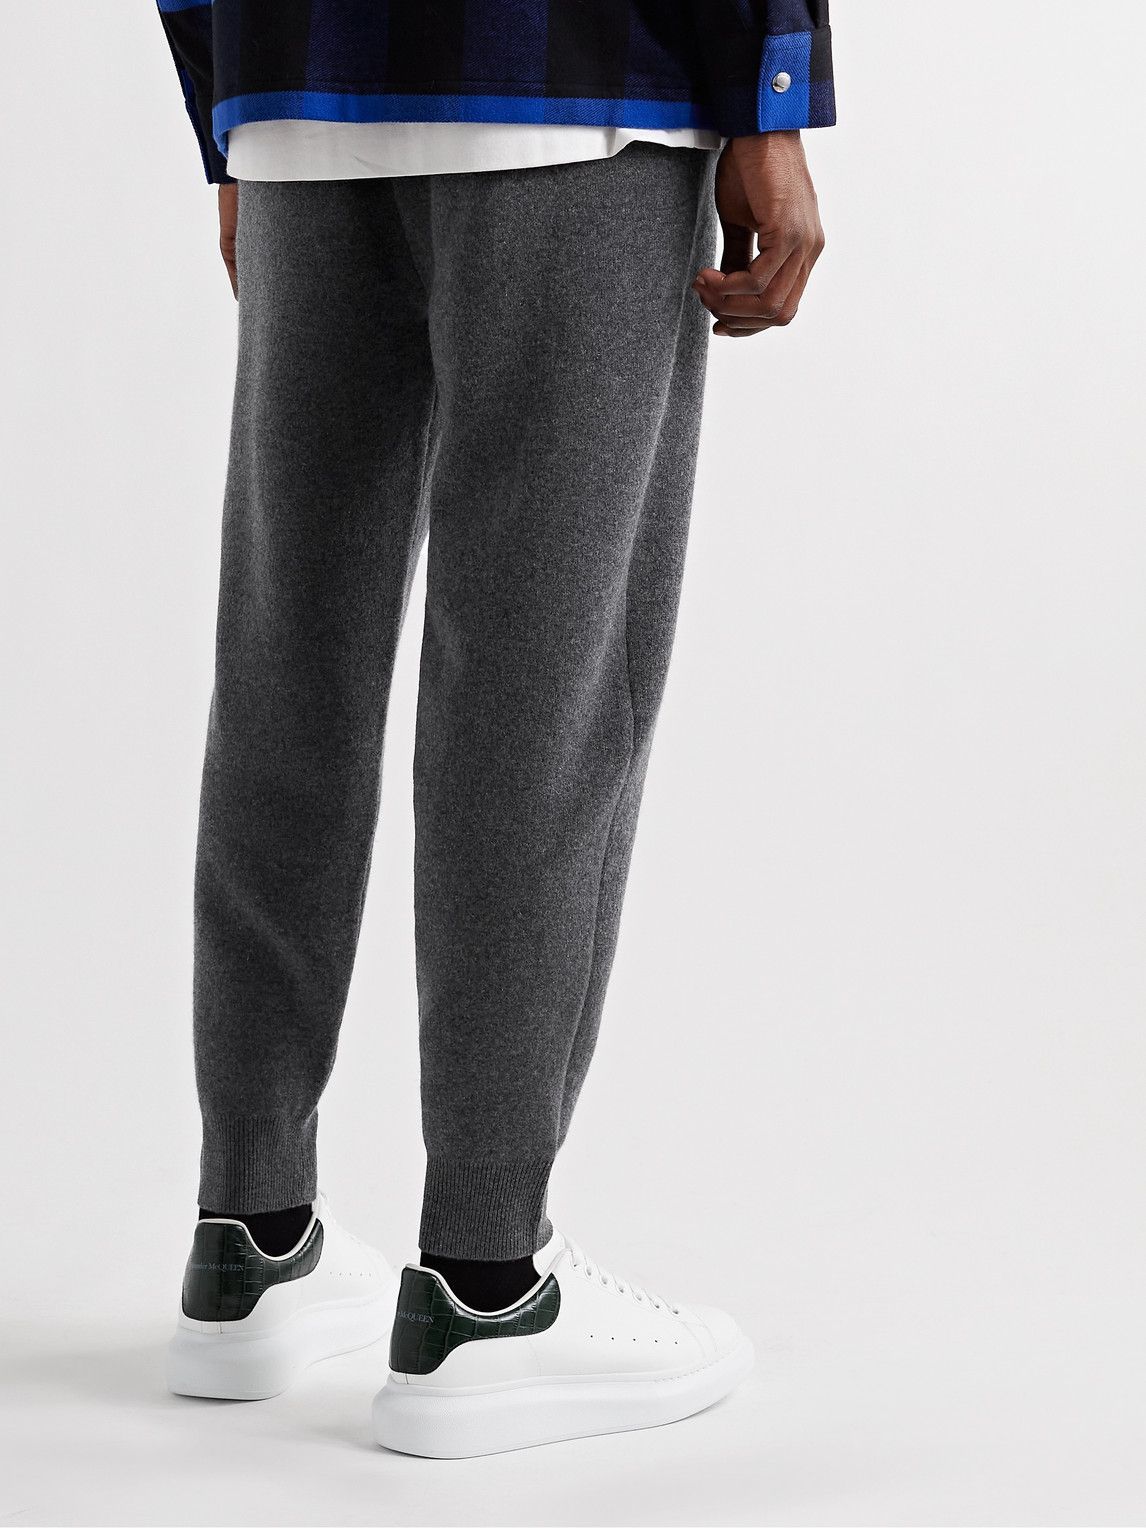 Burberry - Tapered Logo-Embroidered Cashmere-Blend Drawstring Sweatpants -  Gray Burberry